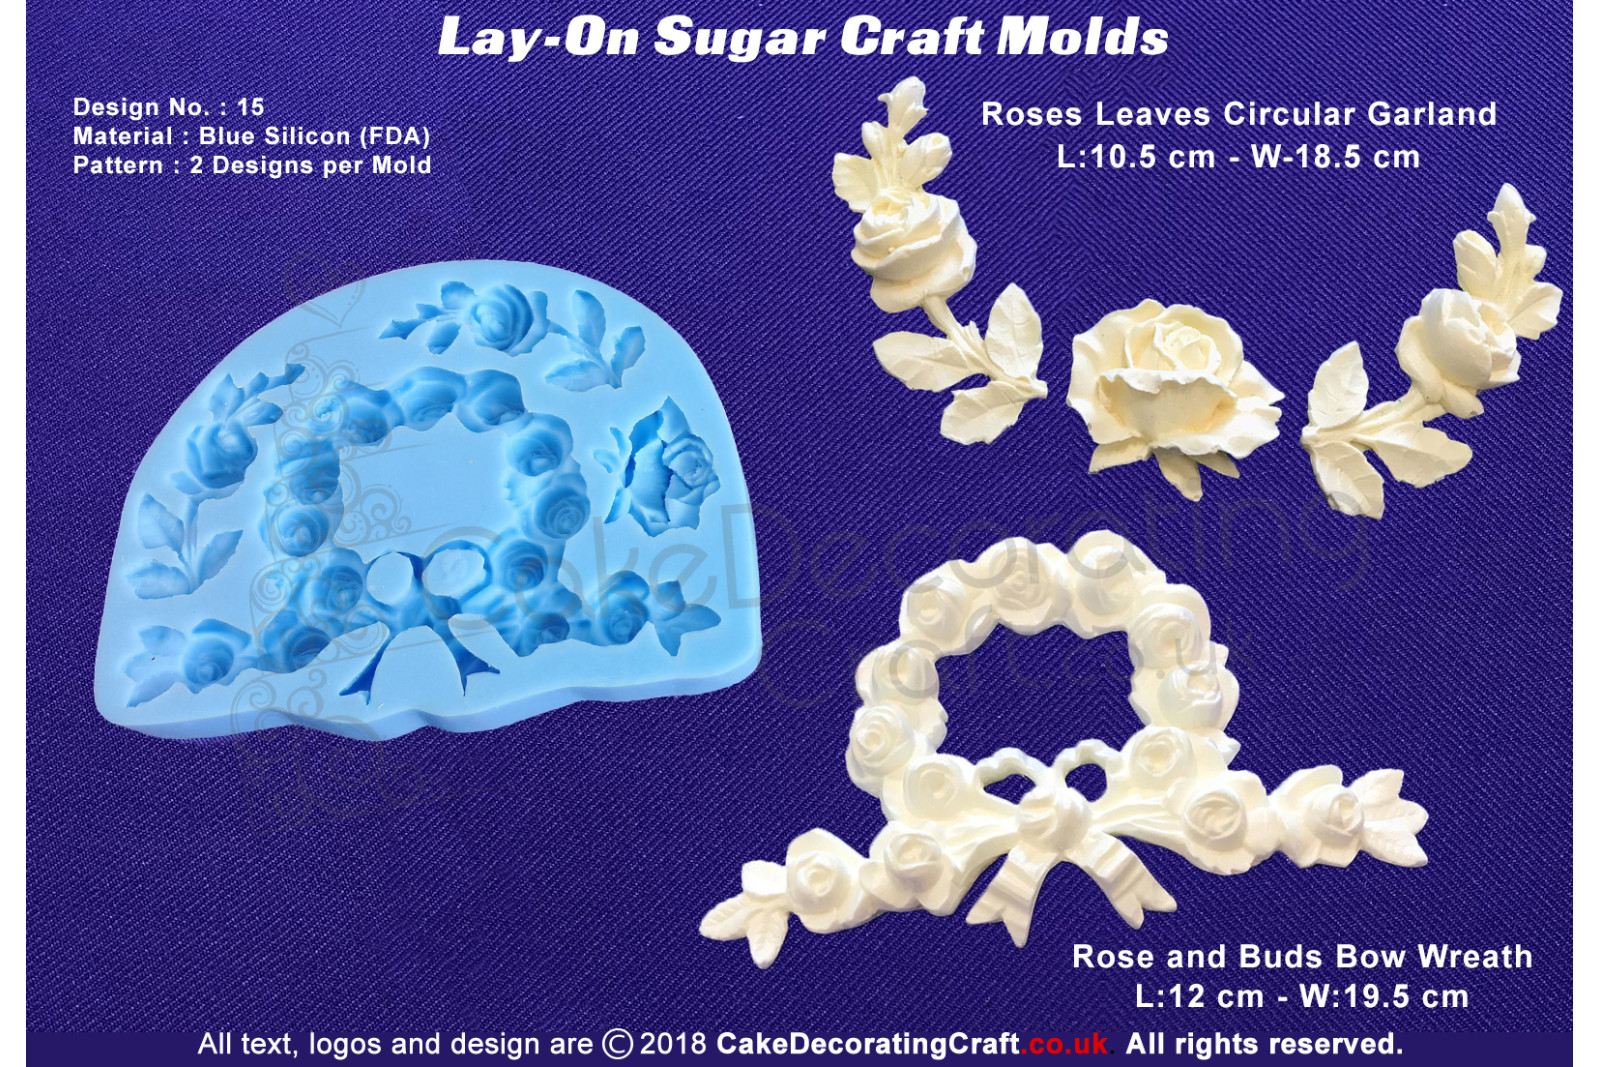 Design 15 | Lay-On Silicone Cake Molds | Deep Floral Roses | Wedding Cakes | Design | Sugar Cake Decorating Craft 